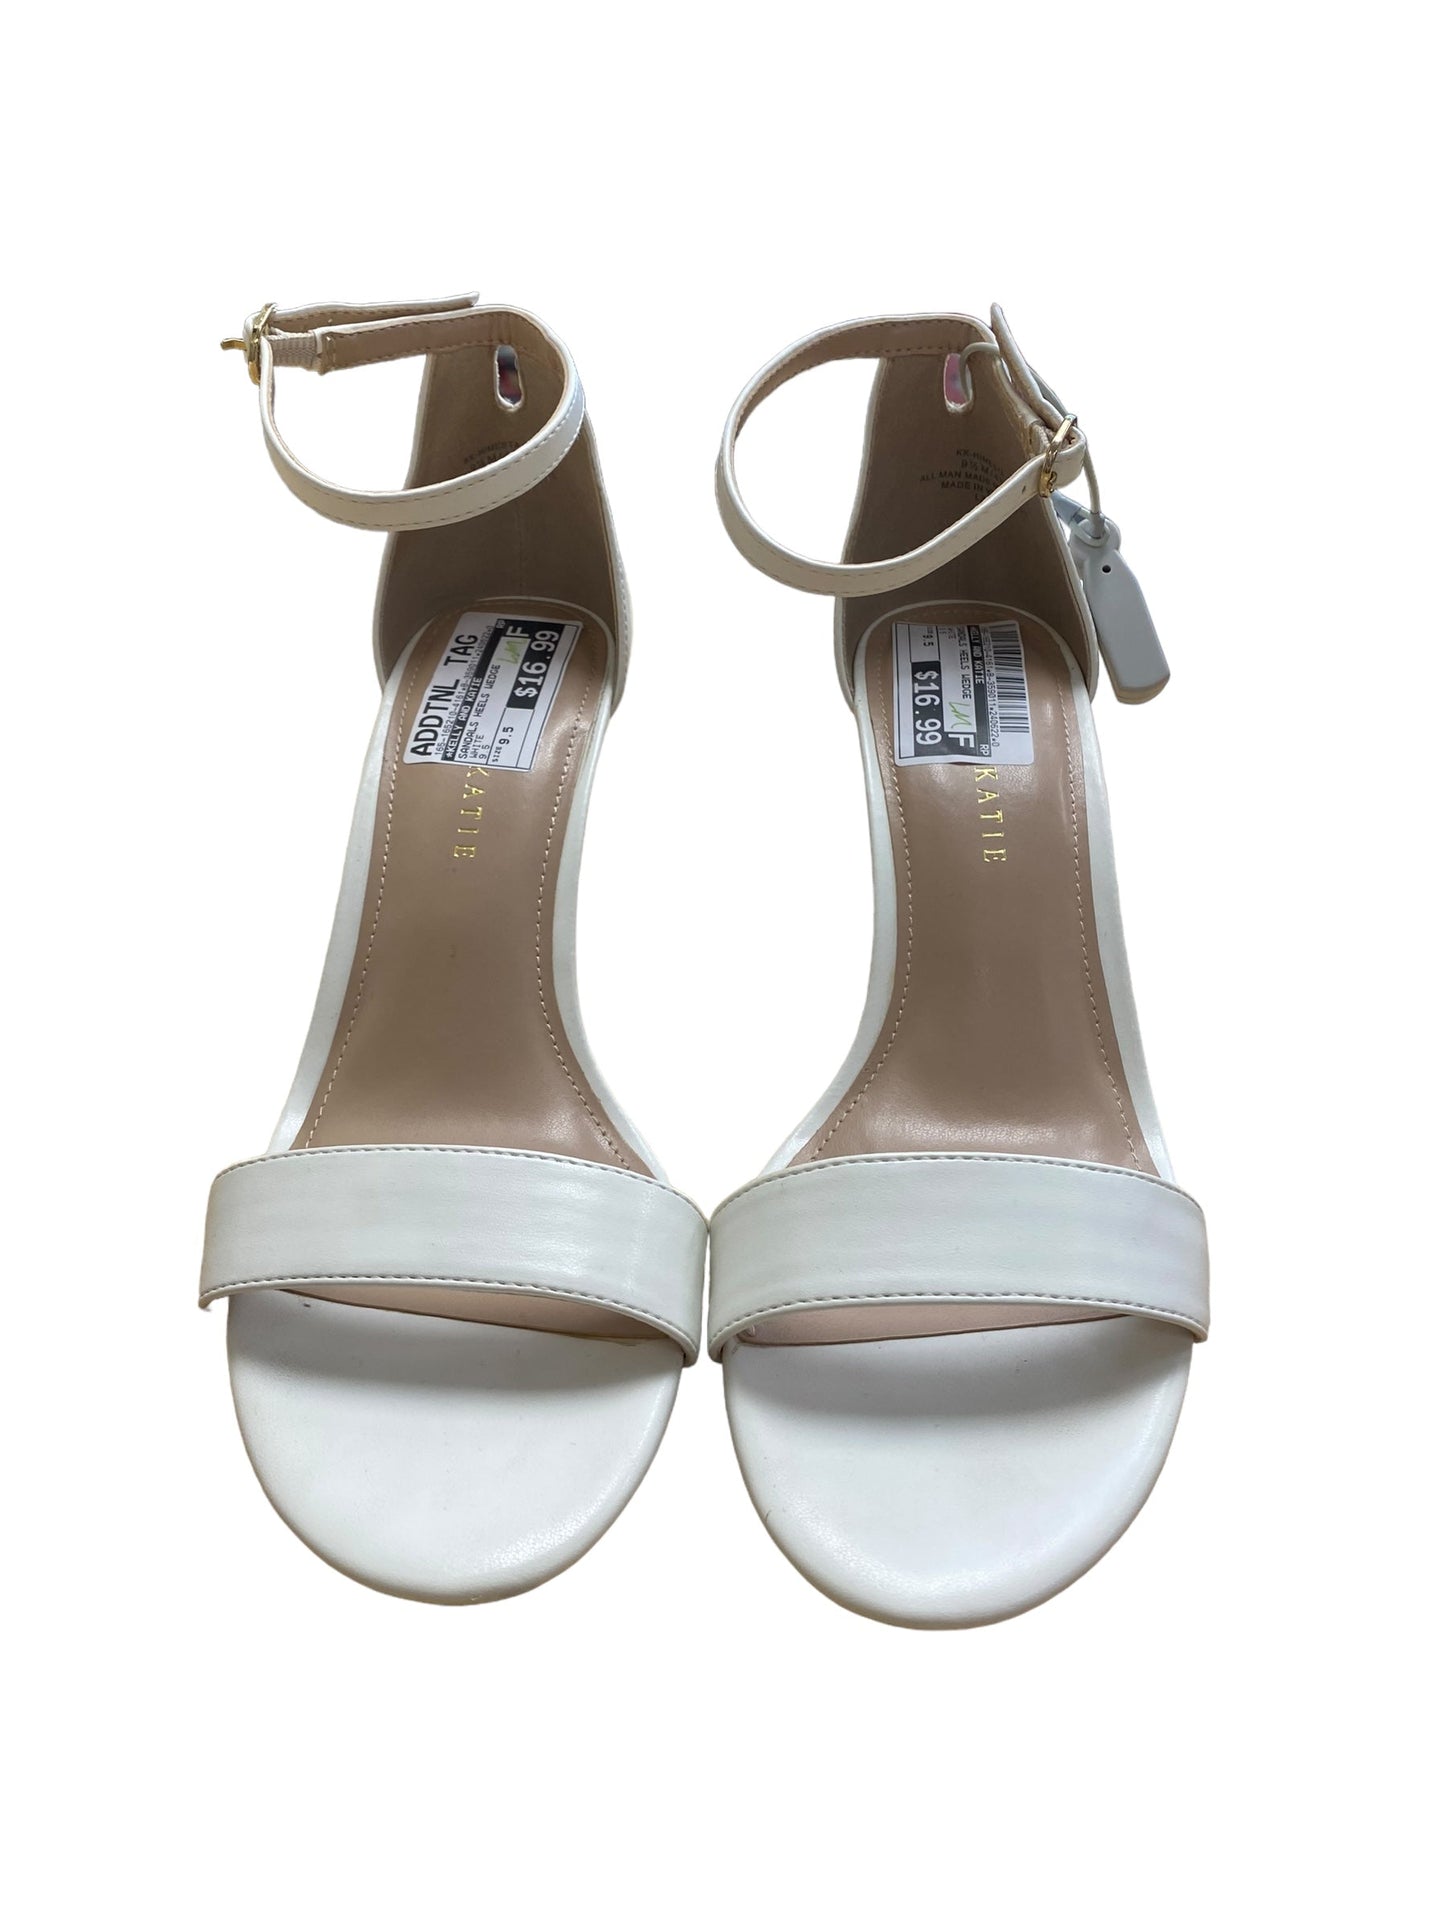 White Sandals Heels Wedge Kelly And Katie, Size 9.5